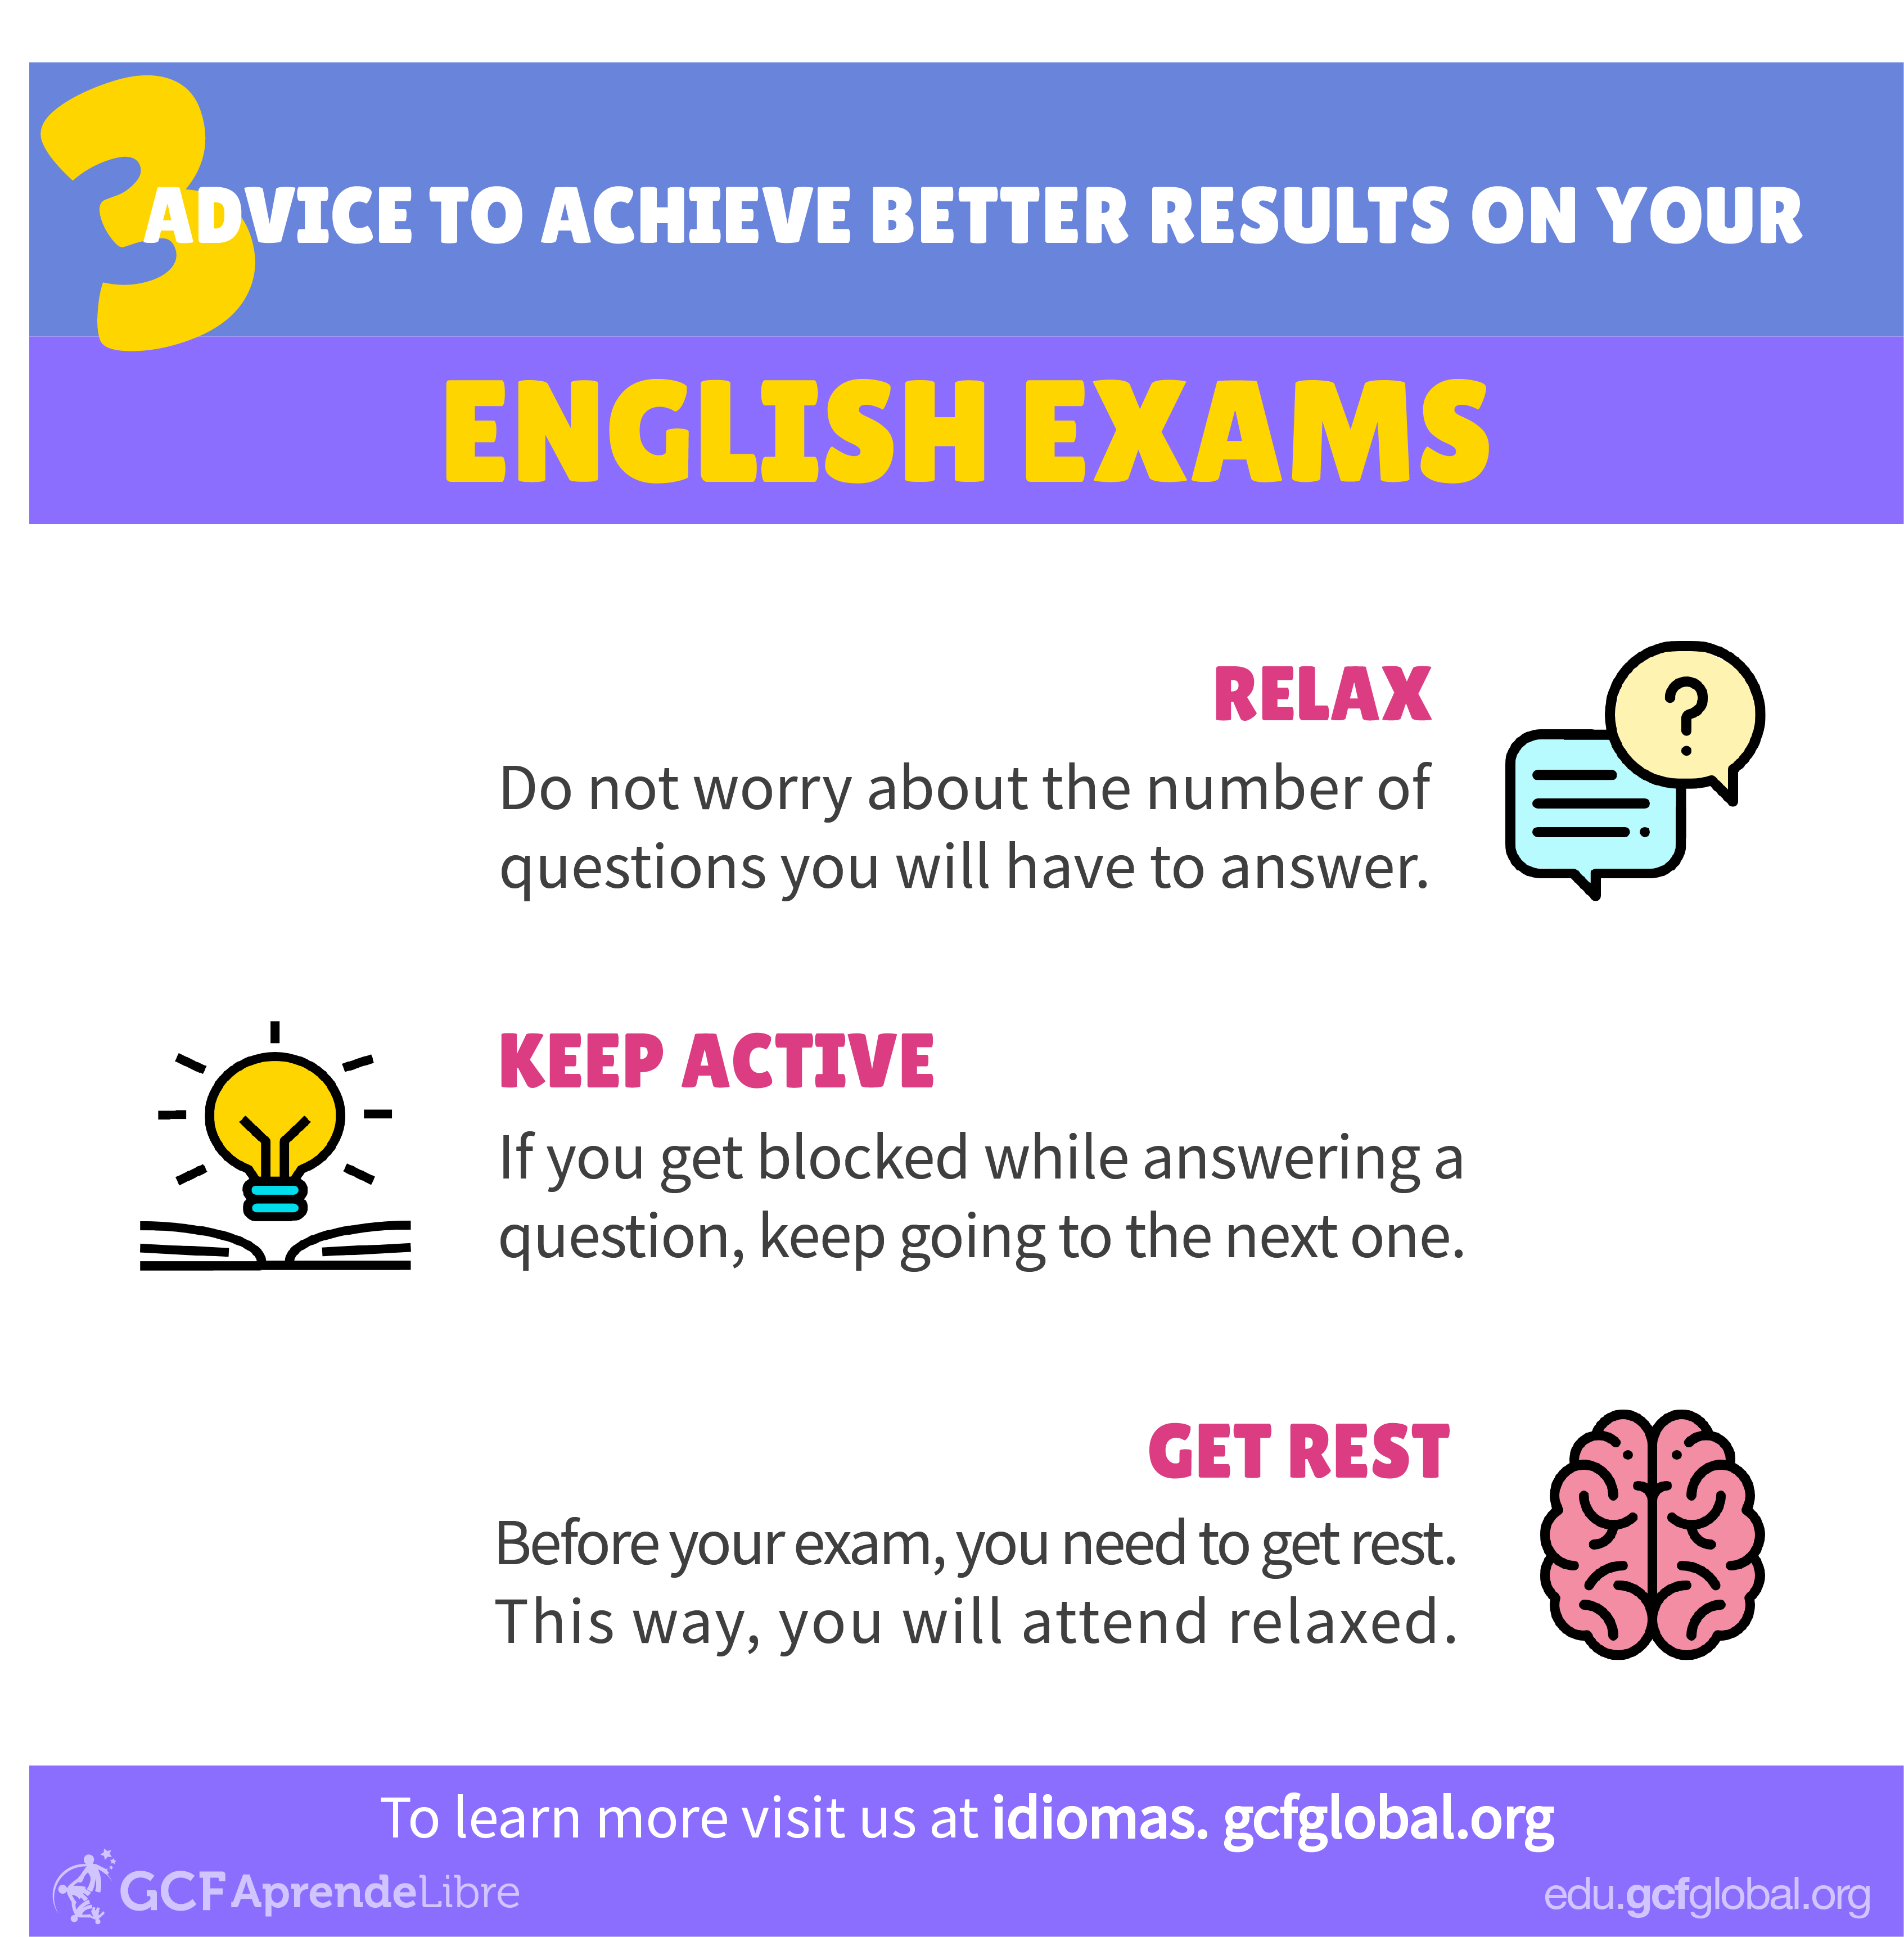 Advice to achieve better results on English exams